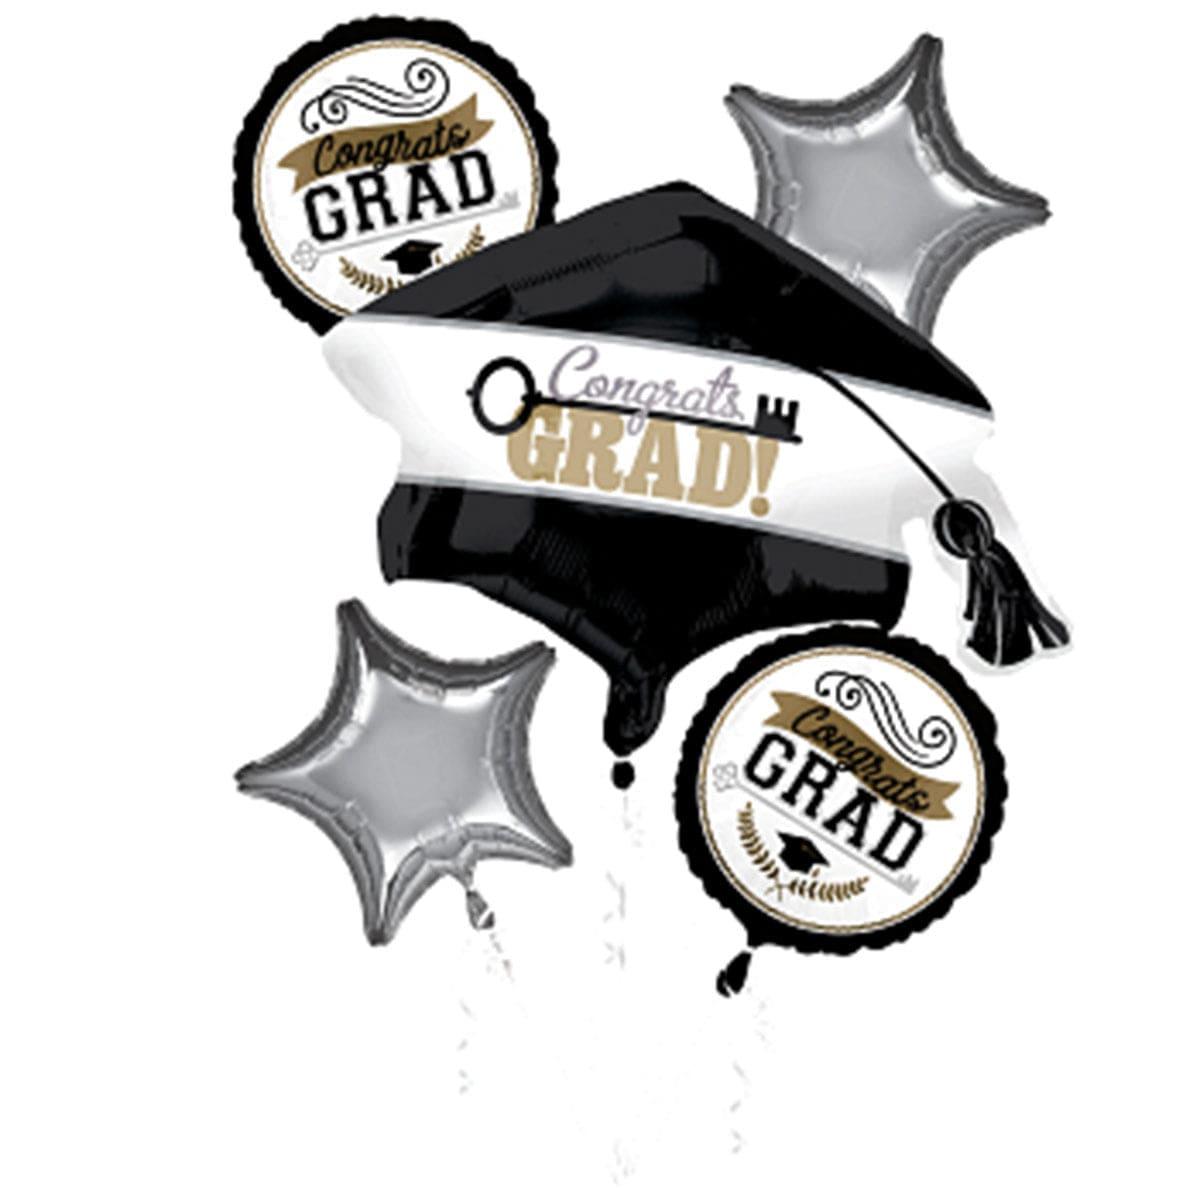 LE GROUPE BLC INTL INC Balloons Graduation "Congrats Grad!" Balloon Bouquet, Black and Silver, 5 Count, Helium Inflation not Included